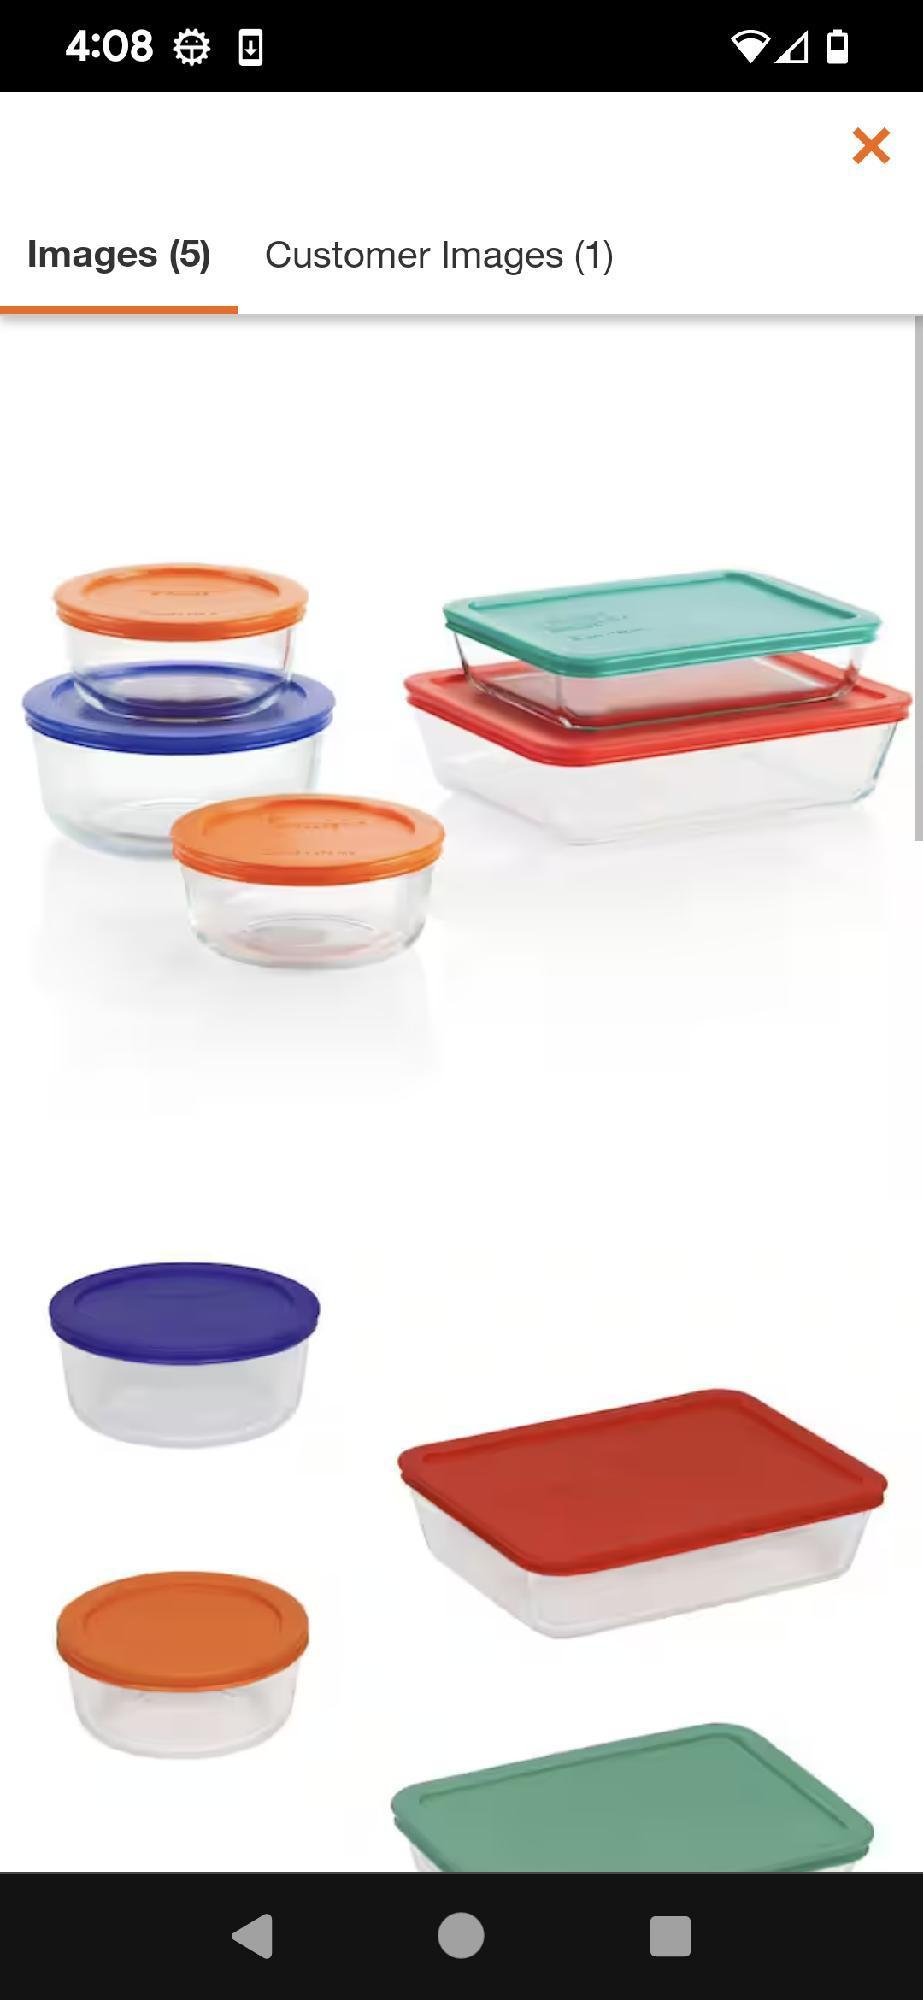 Pyrex Simply Store 10 Piece Glass Storage Bakeware Set with Assorted Colored Lids. Comes in unopened